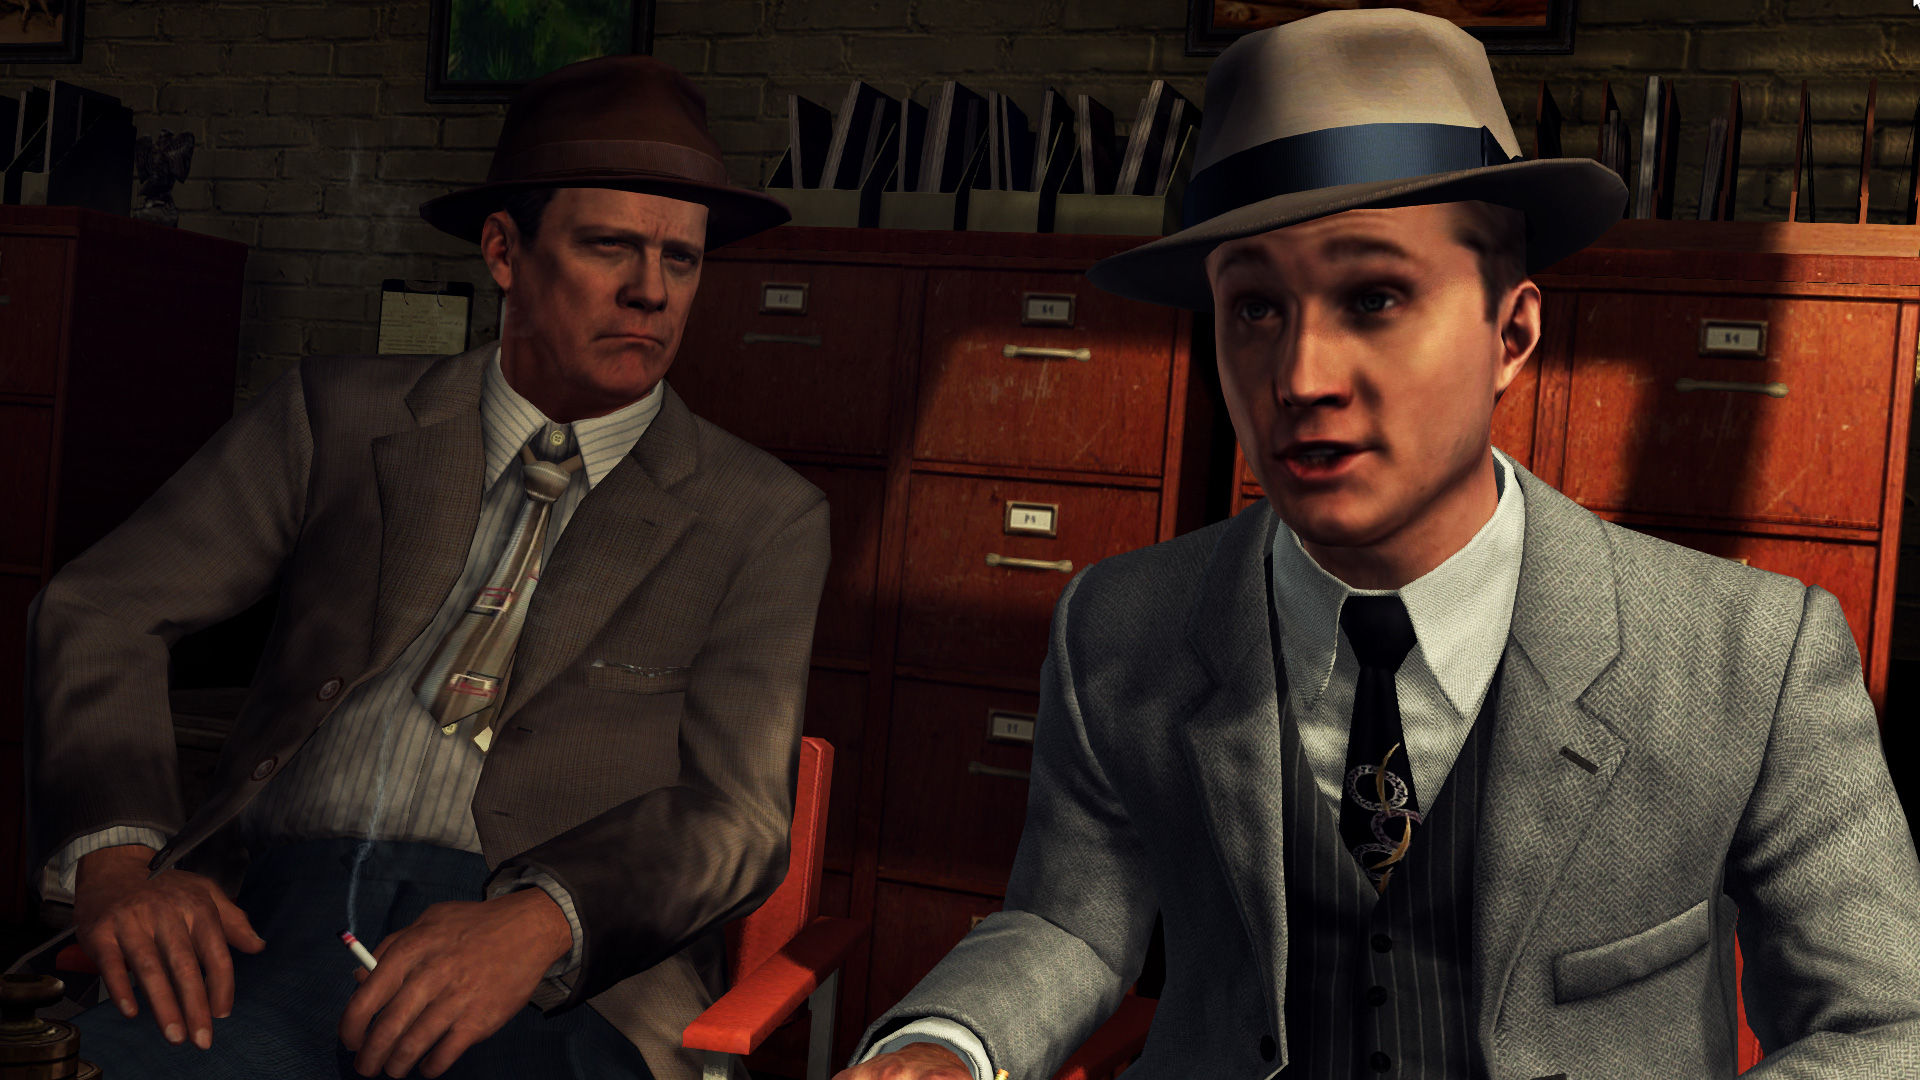 Save 65% on L.A. Noire on Steam